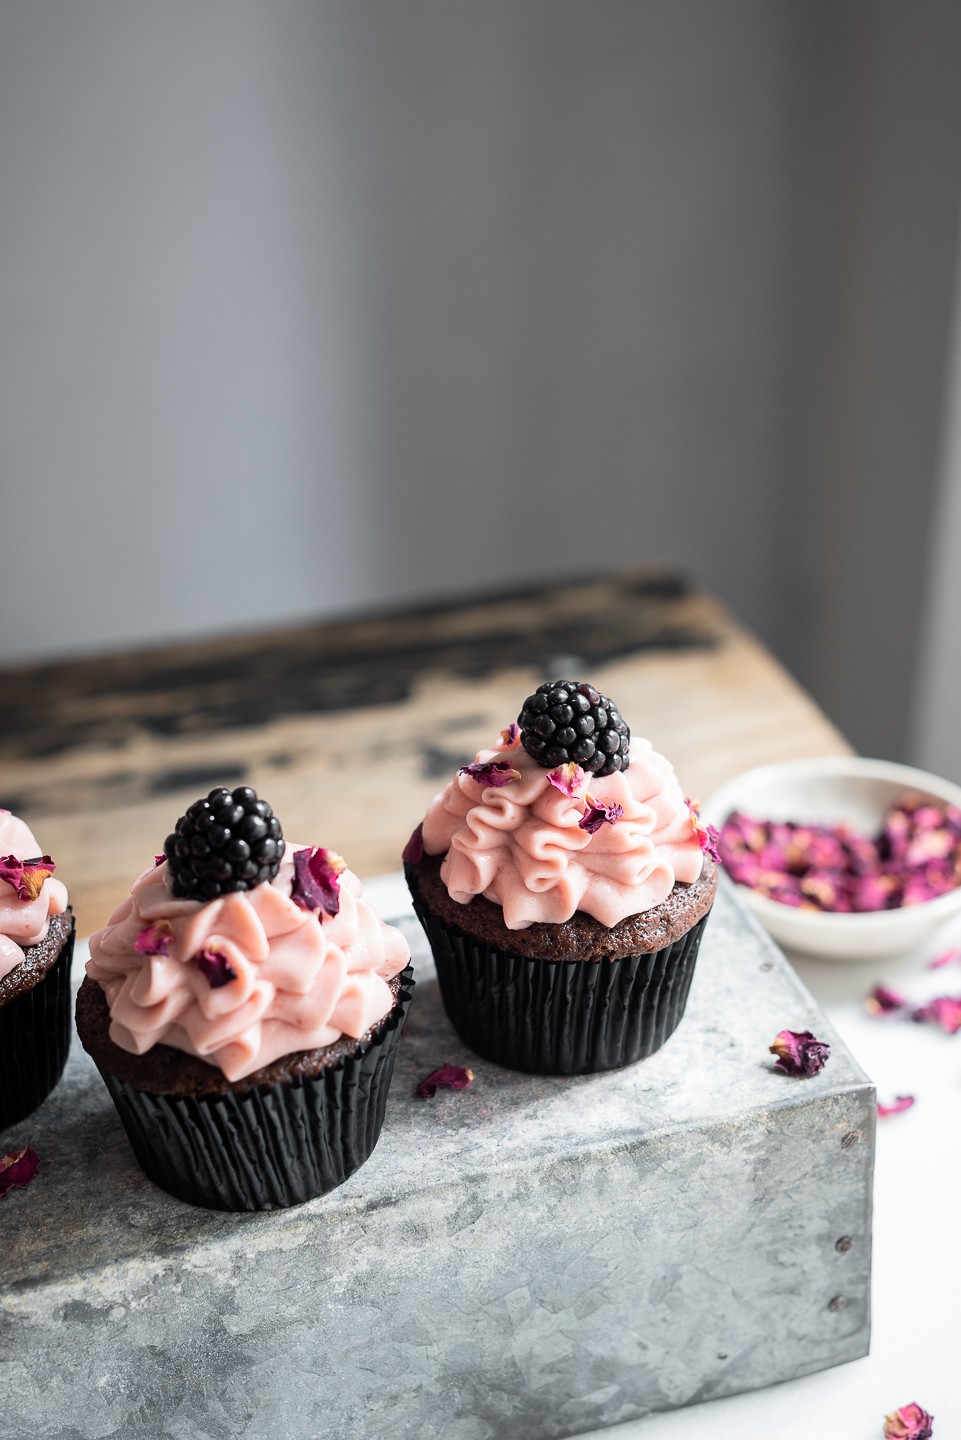 Frilled Devil's Food cupcakes